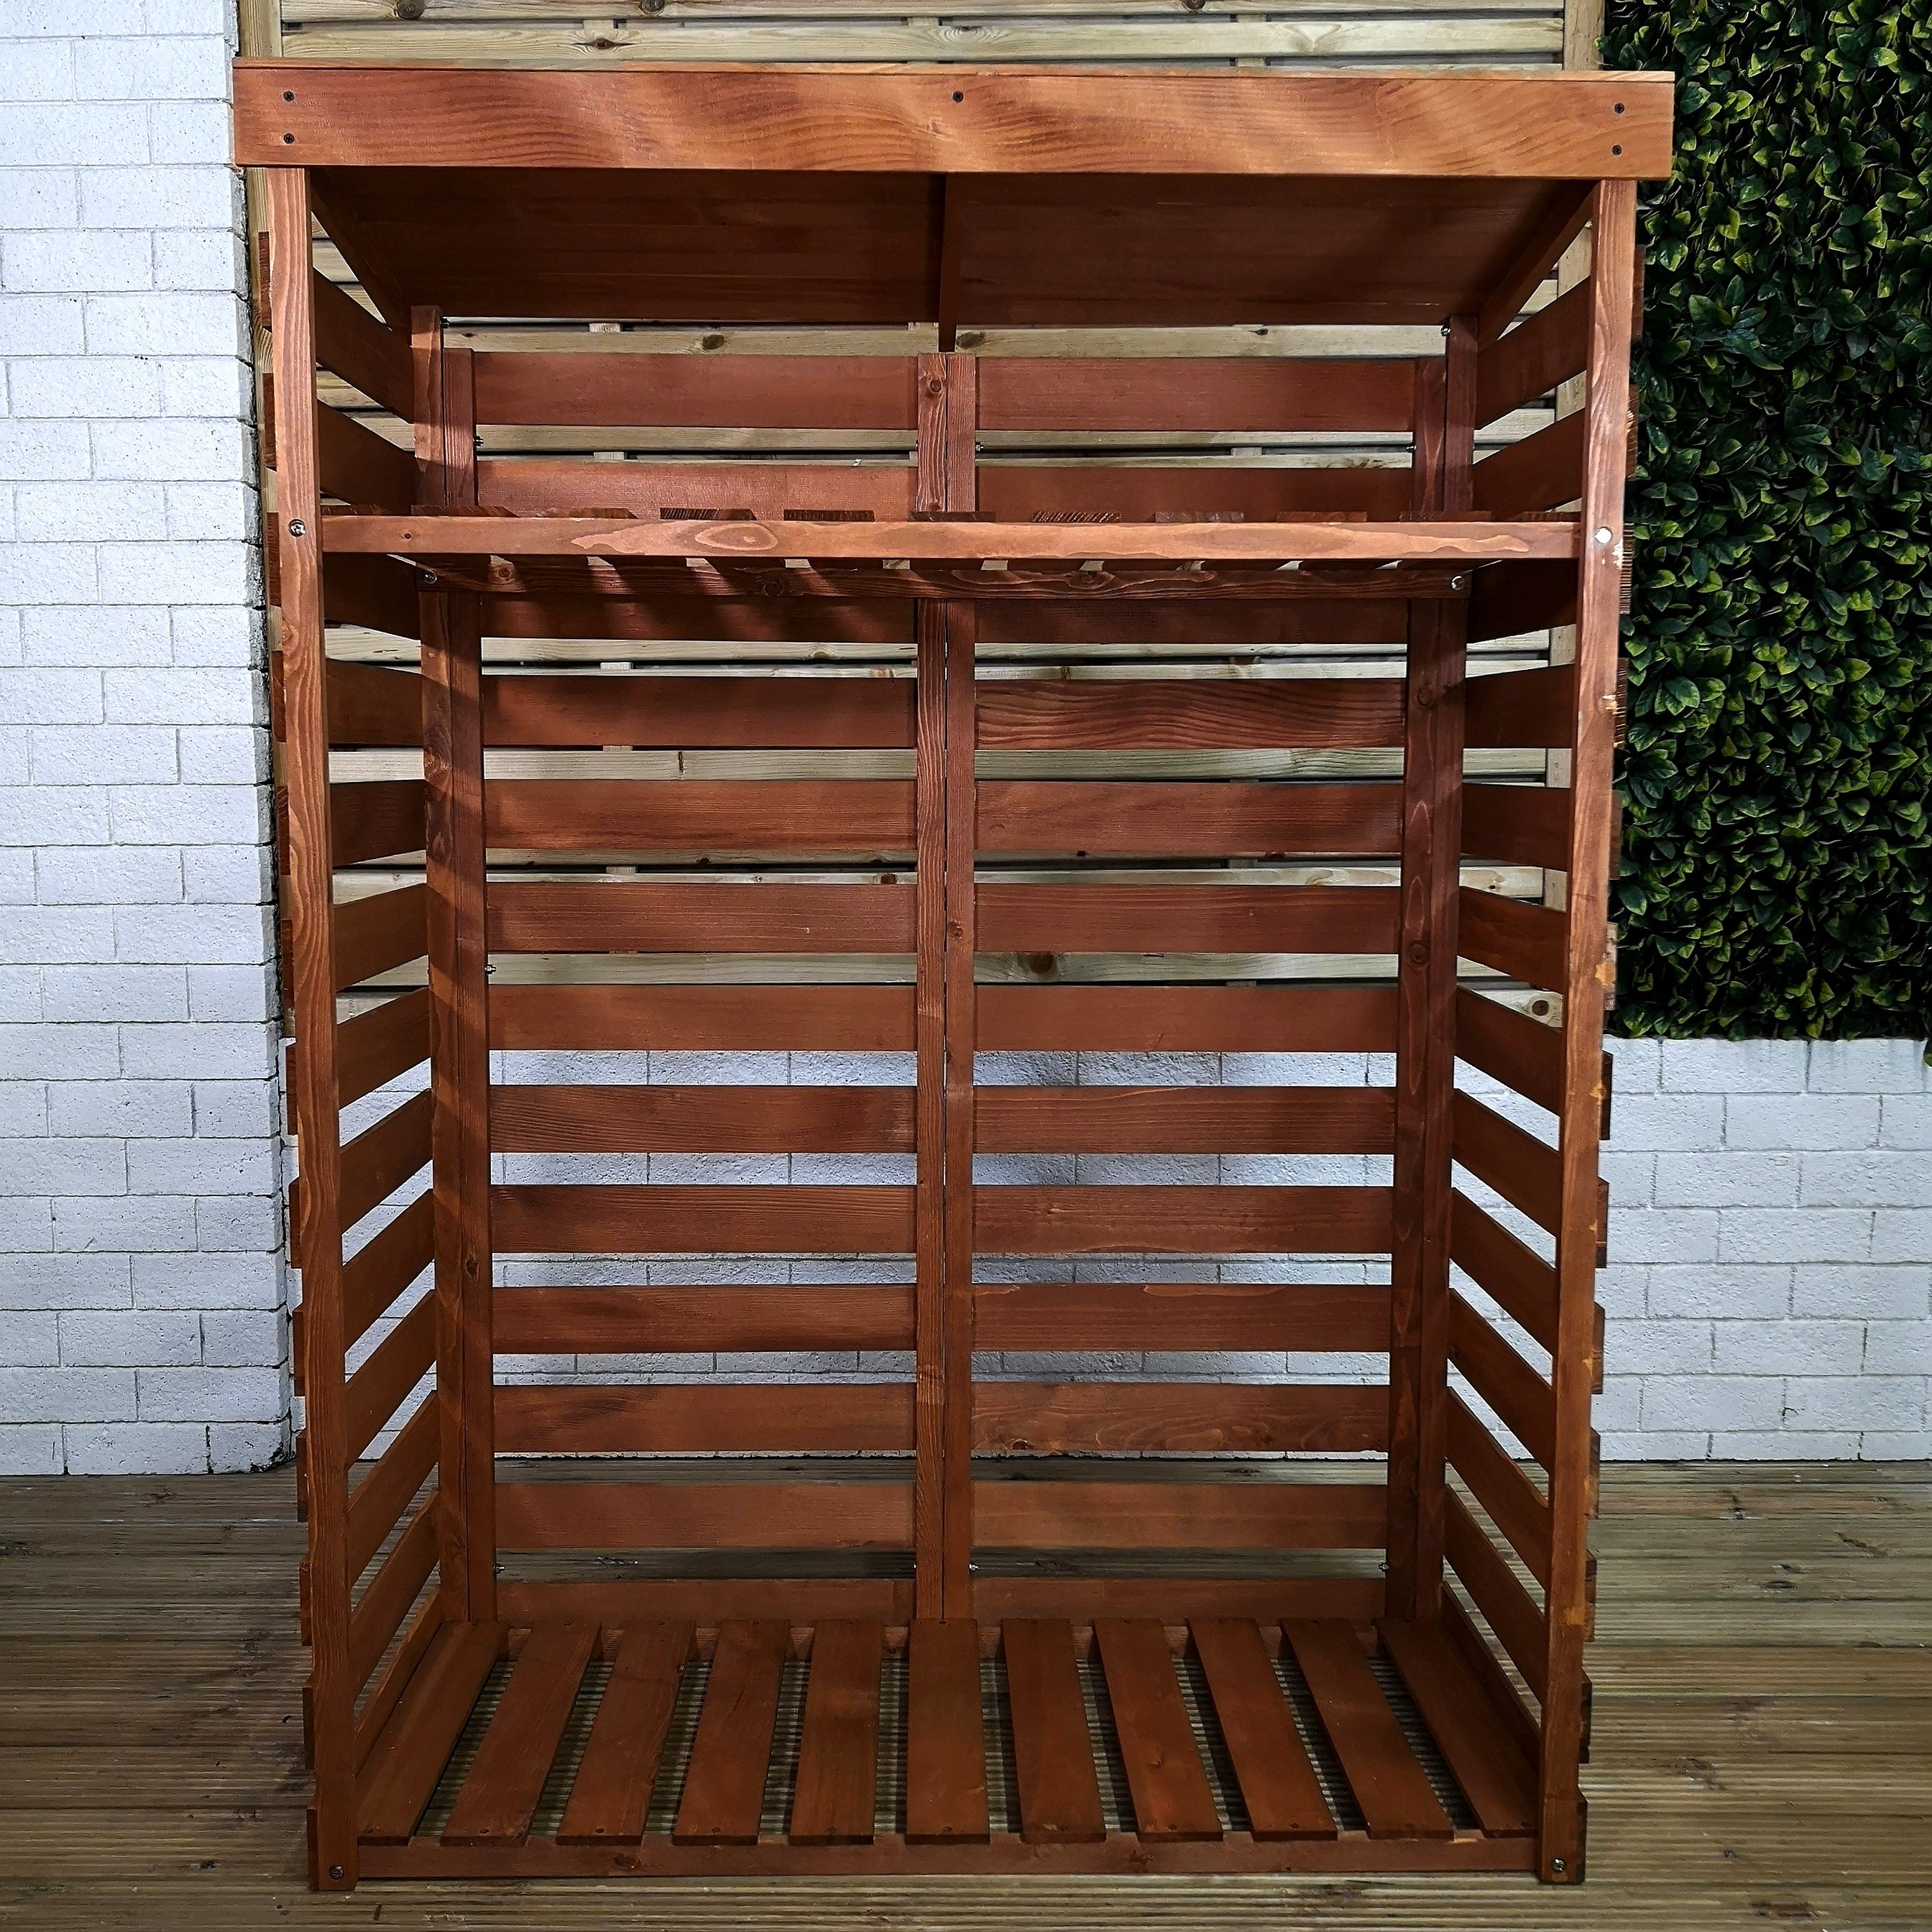 156cm x 117cm Large Wooden Outdoor Garden Patio Log Store Shed with Shelf 